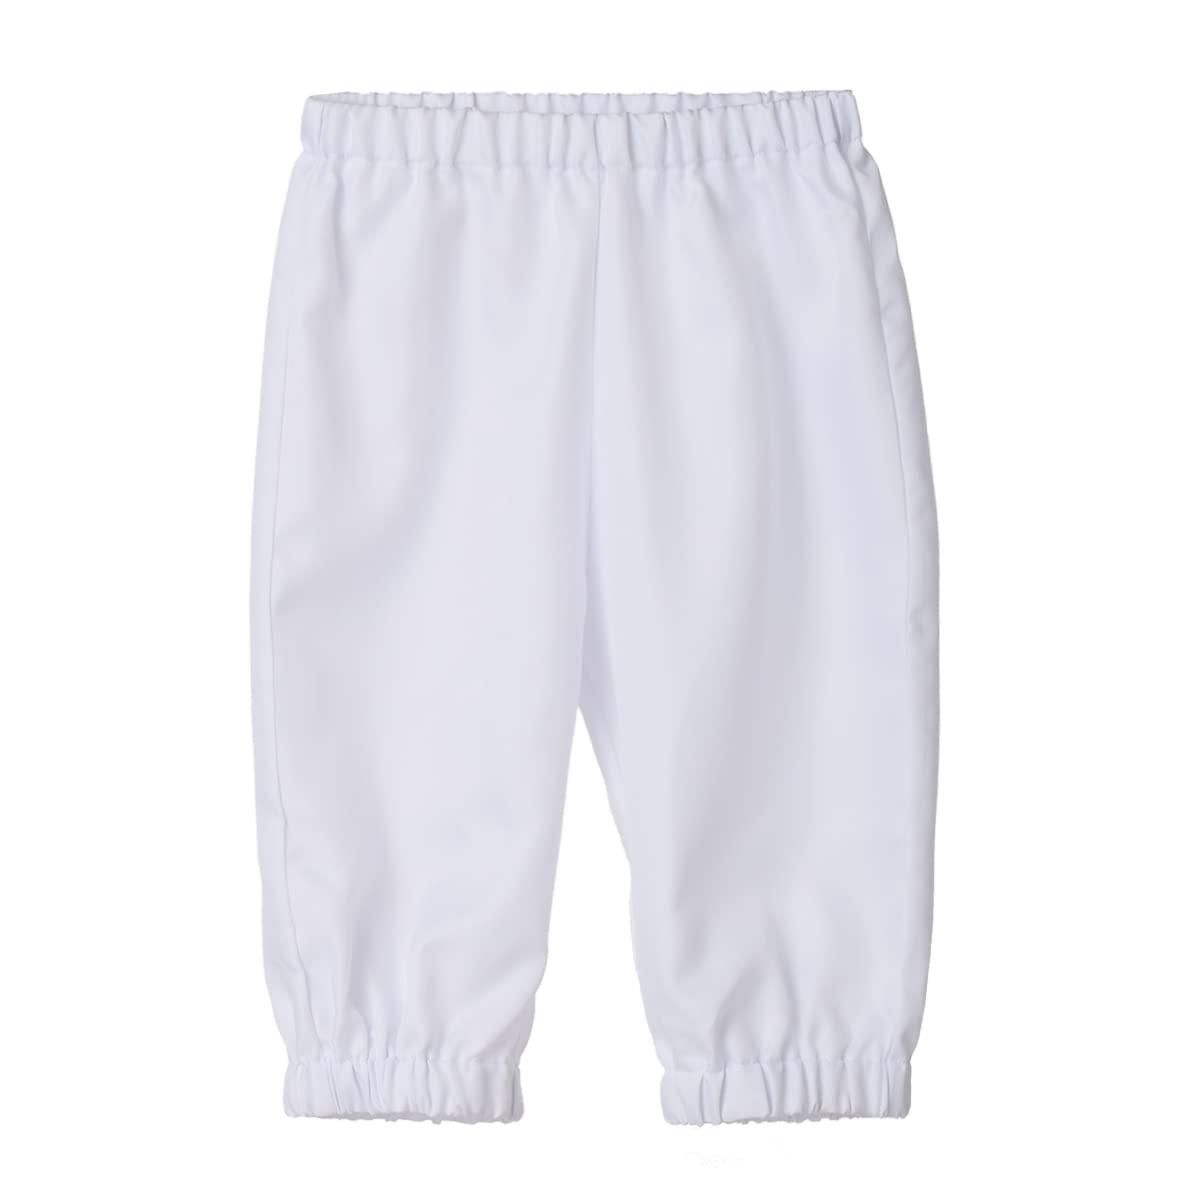 Bpurb Boys Colonial Costume 18Th Century Colonial Boys Costume Boys Colonial Pants Boys Knicker Pants Size 7 8 10 12 14 16 (Whit